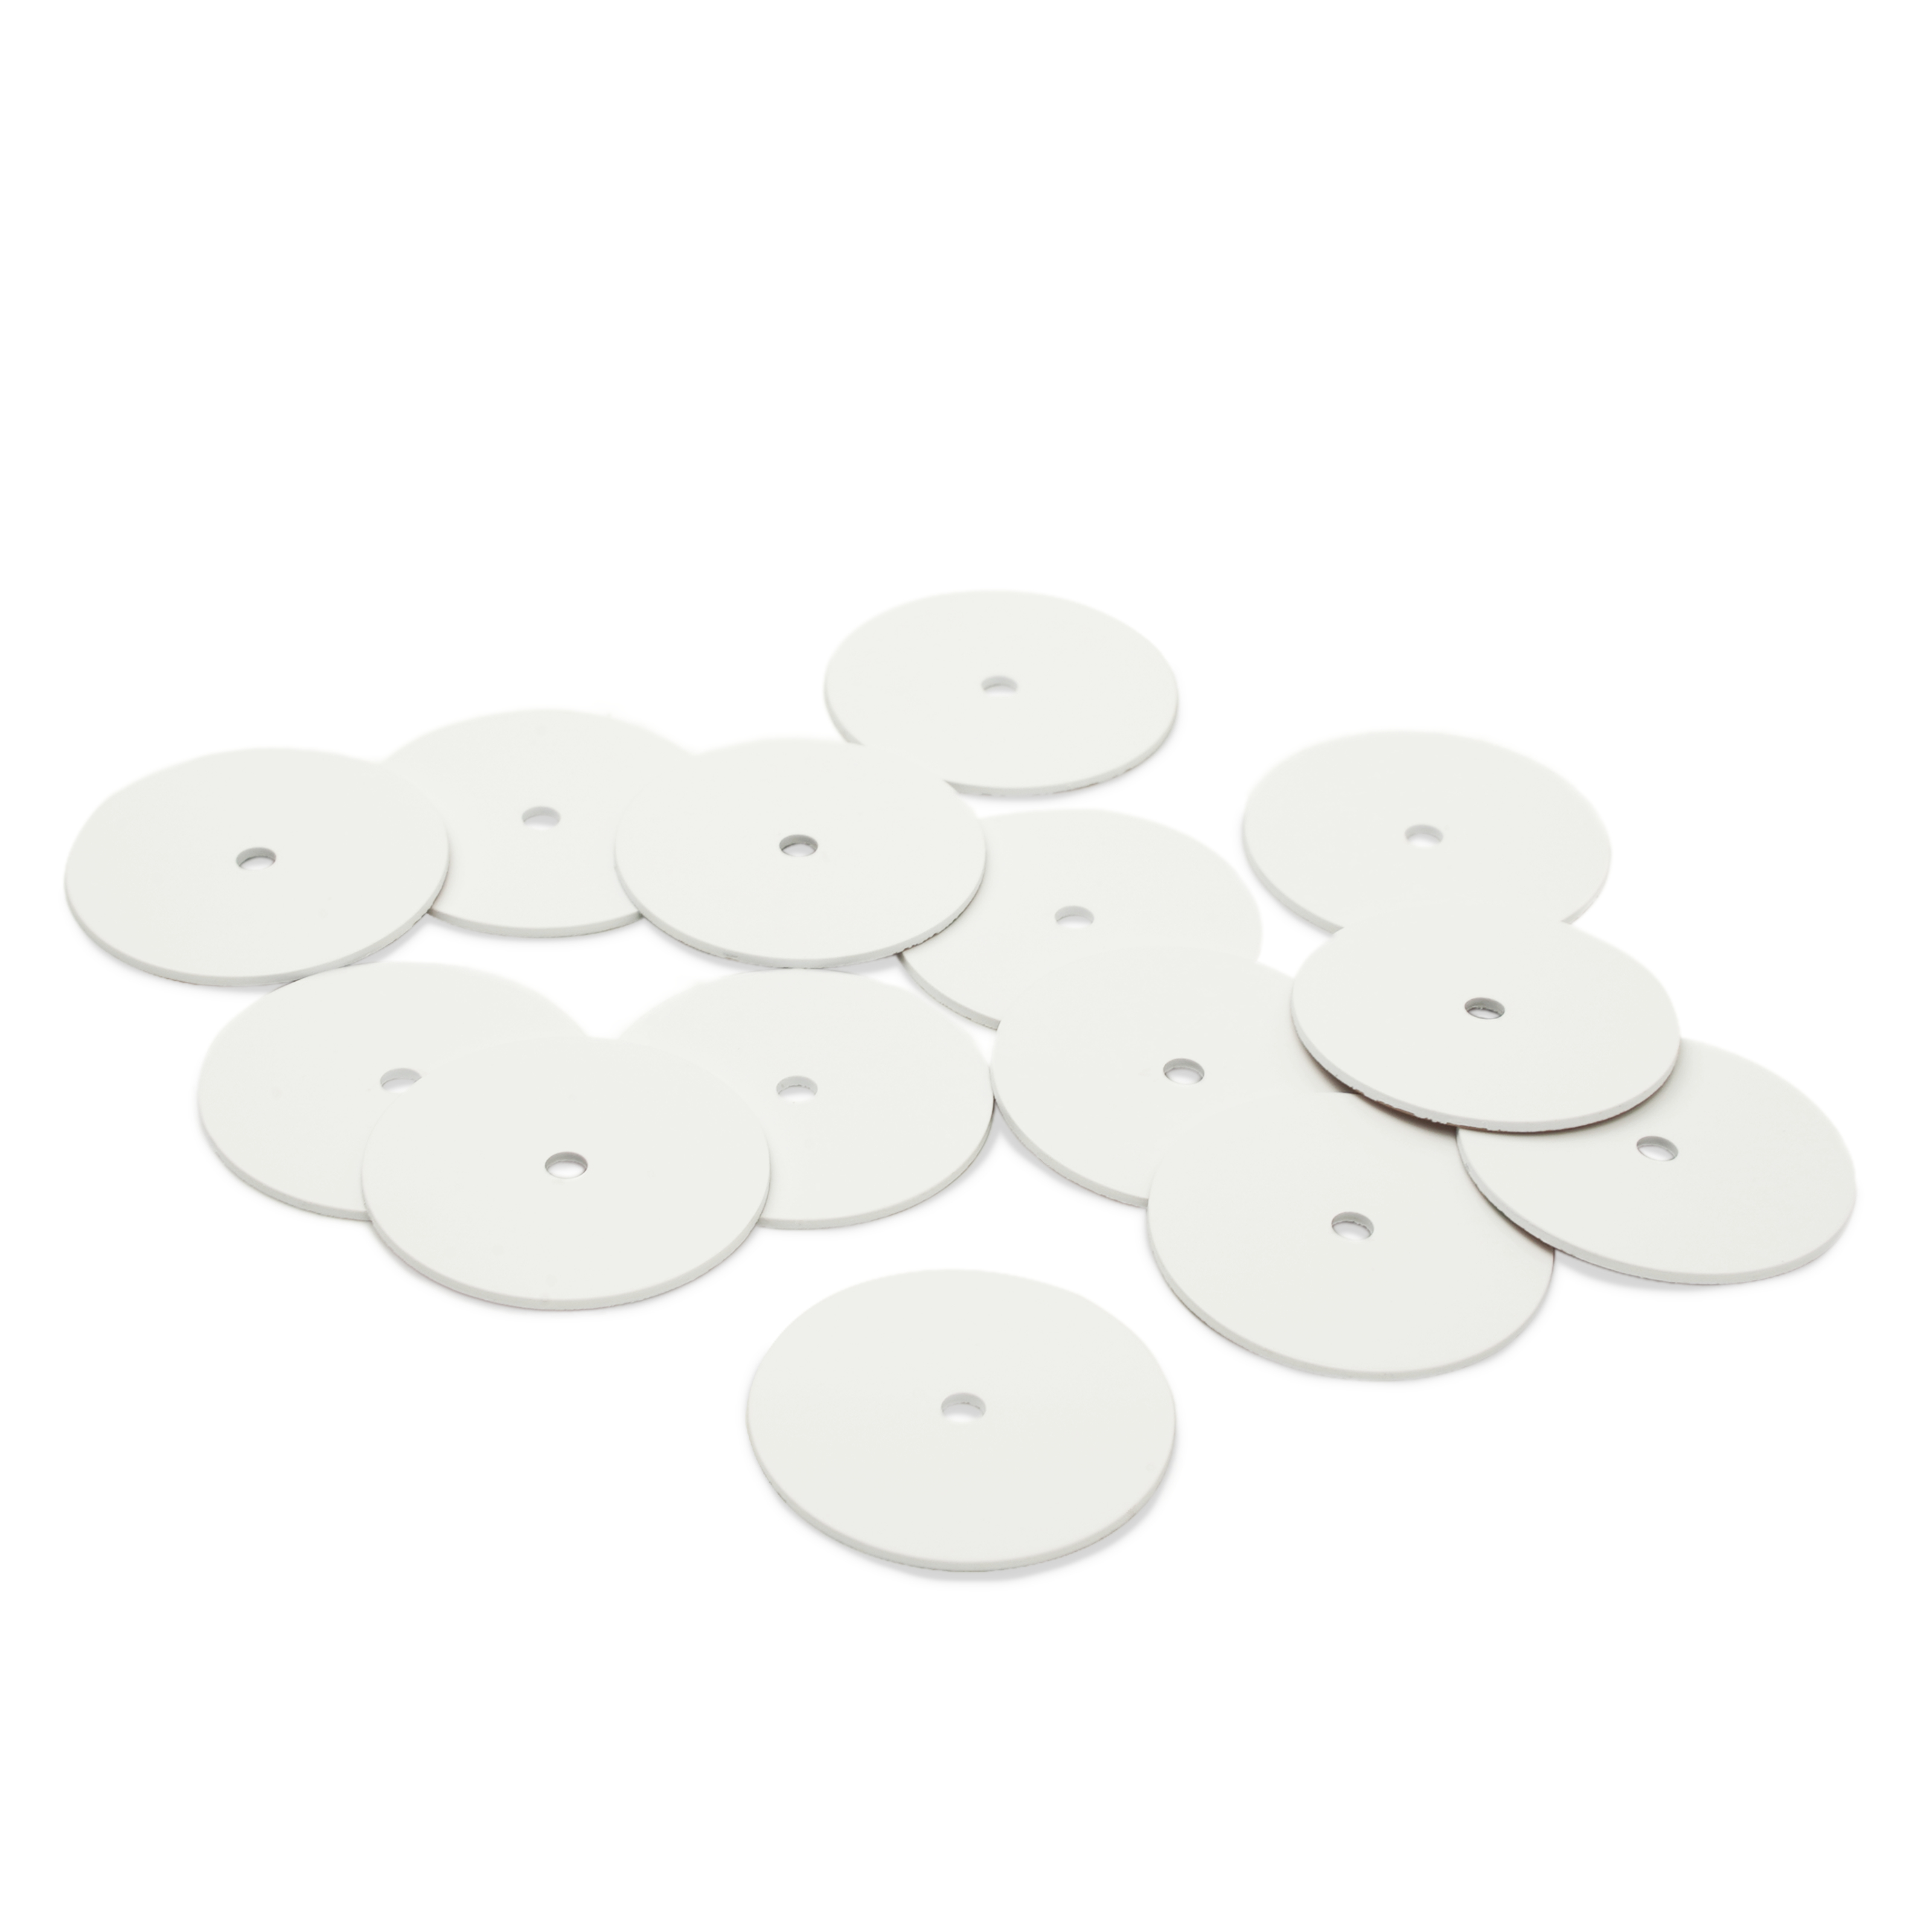 NFC Sticker PVC - 28 mm - NTAG213 - 180 Byte - white - with perforation